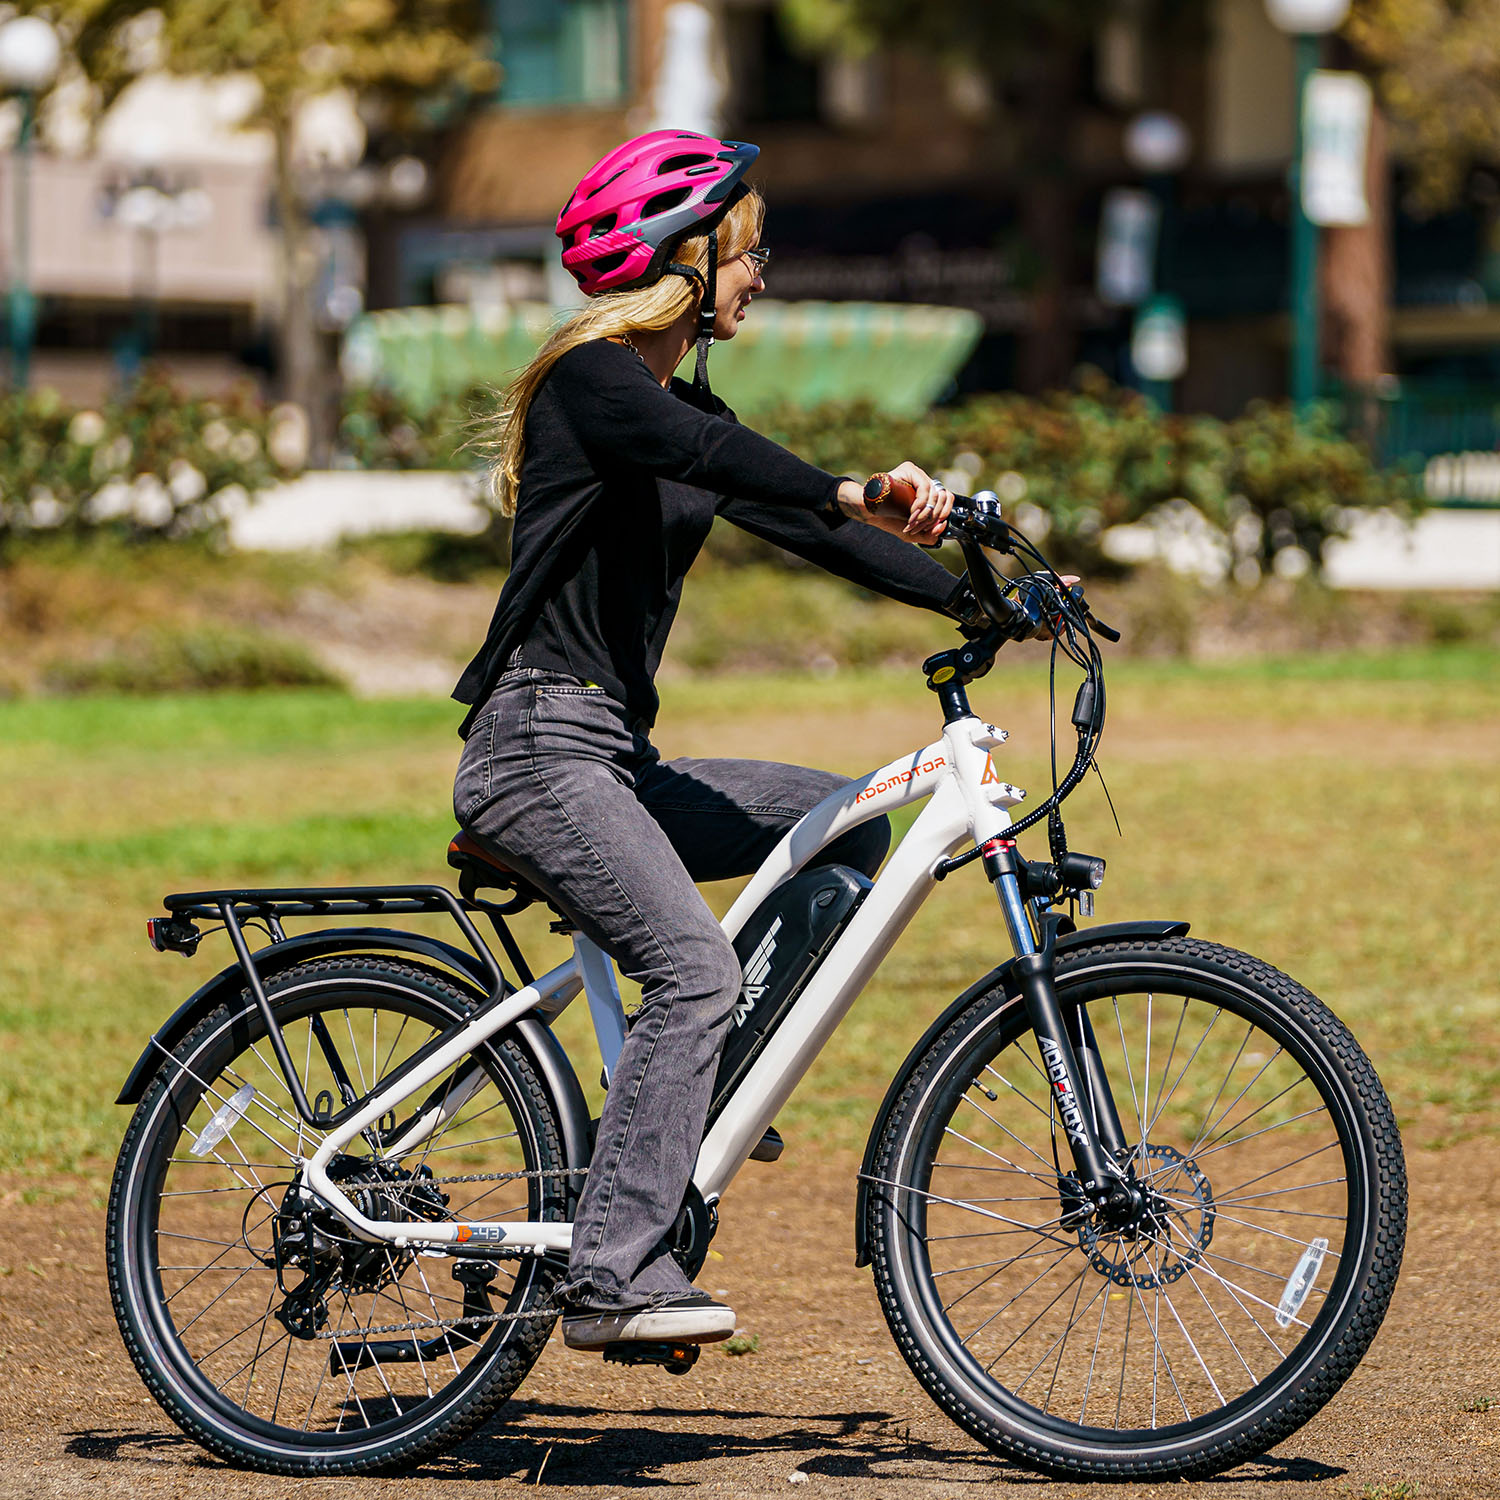 Choosing the Right Electric Bike: Cruiser vs. Commuter - Which One Fits Your Lifestyle?